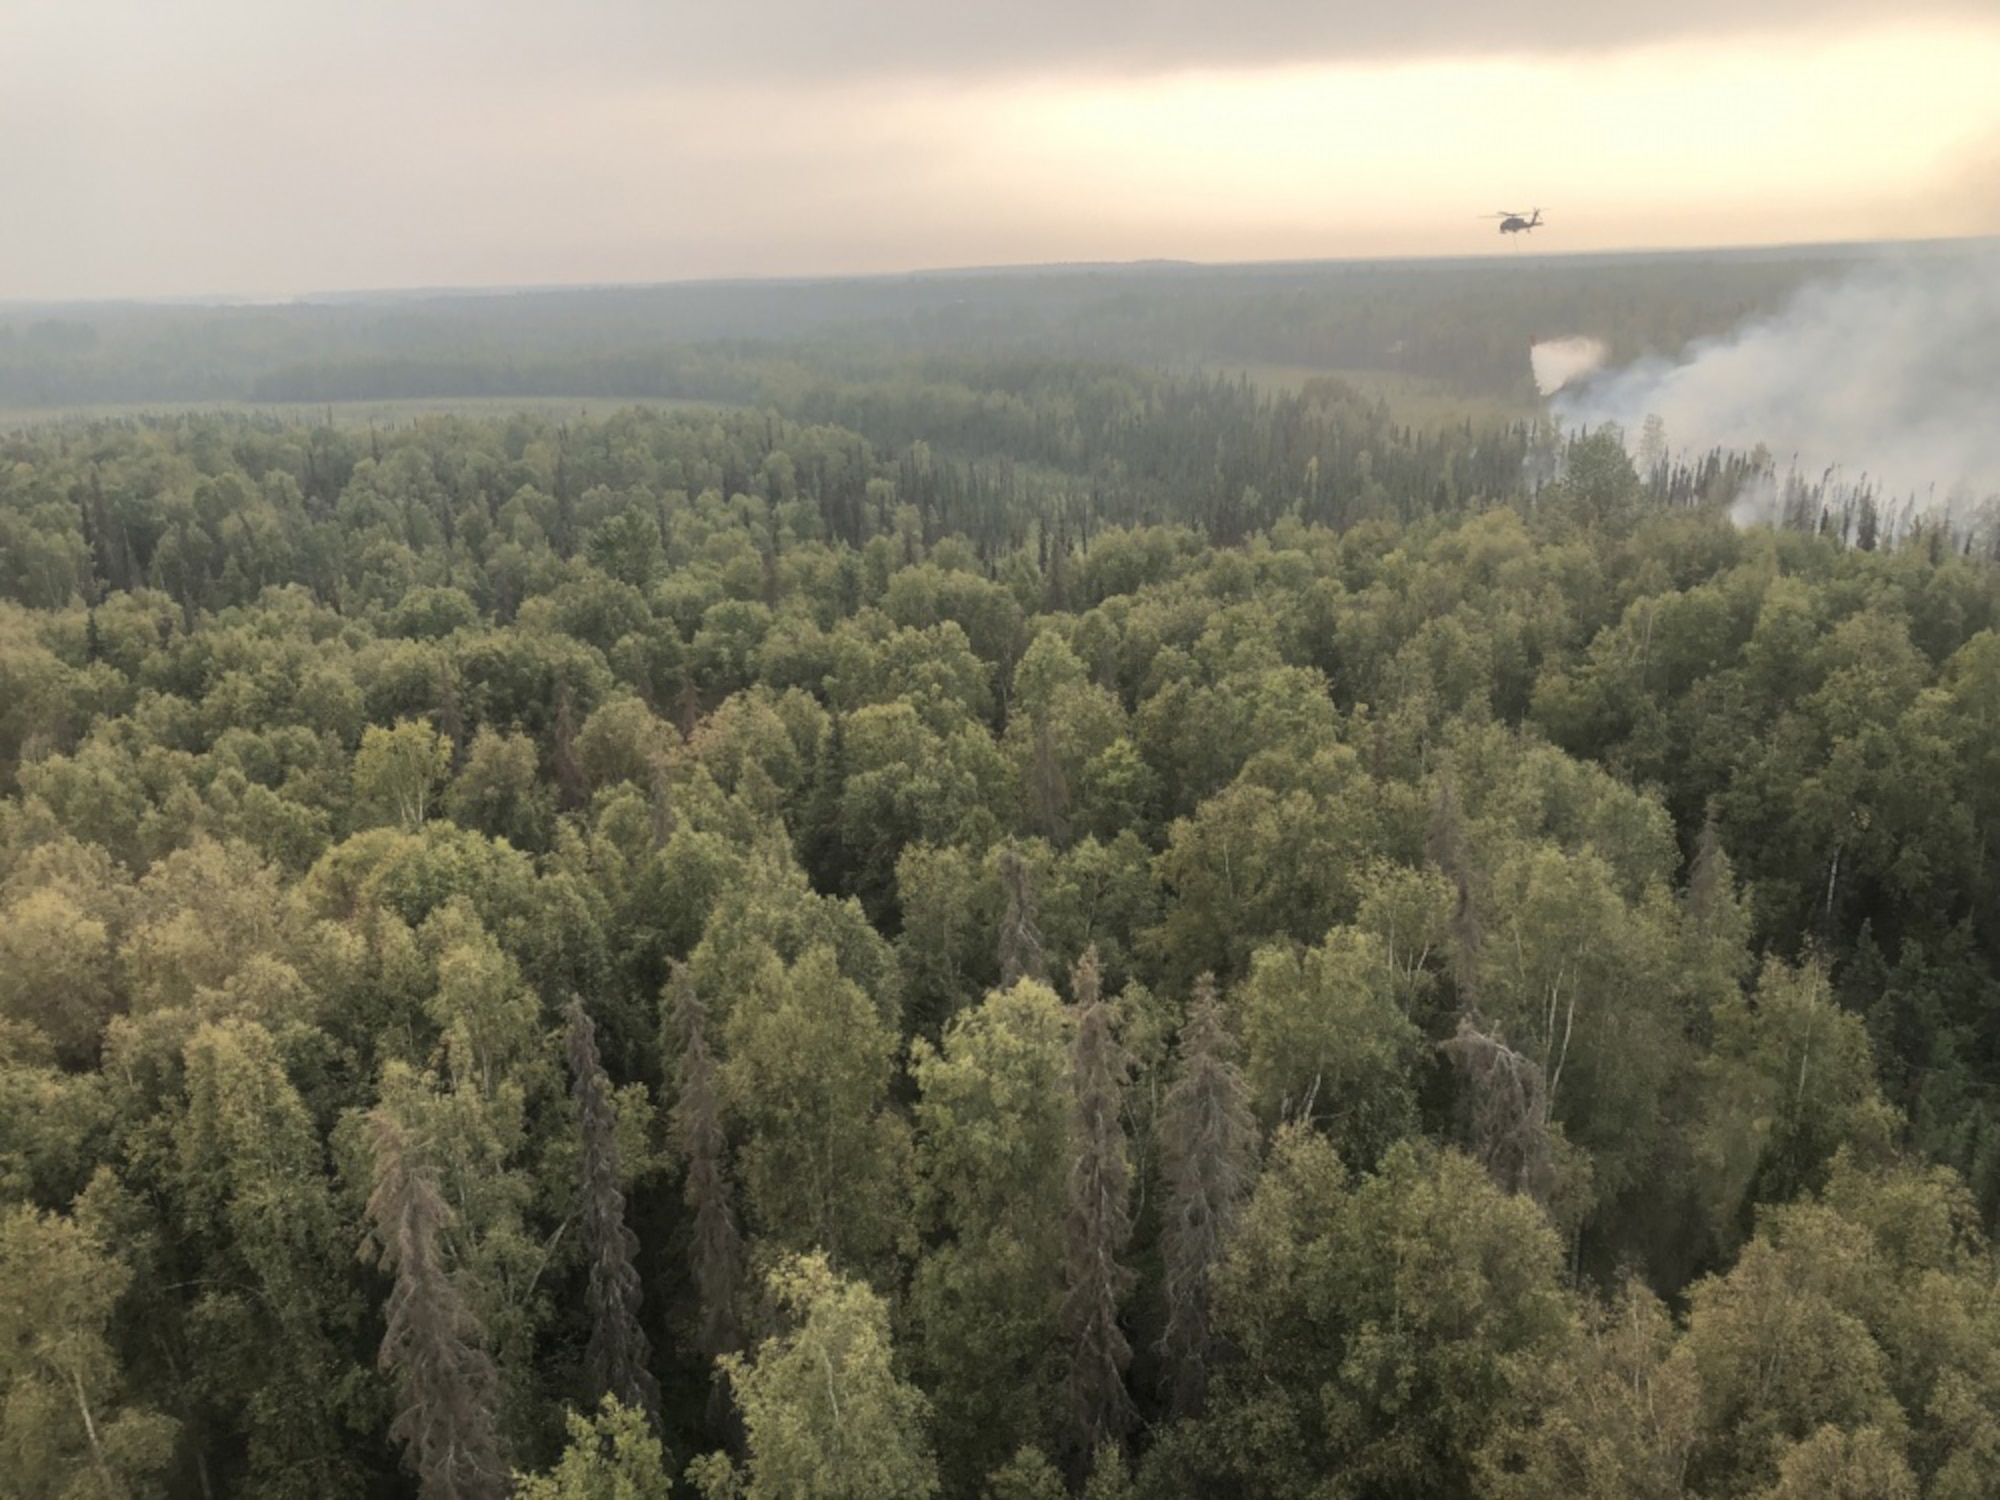 The Alaska Army National Guard's 1st Battalion, 207th Aviation Regiment, supports the McKinley Fire suppression mission Aug. 19, 2019, with two UH-60 Black Hawk helicopters. The helicopters dropped more than 100,000 gallons of water during a total of 9.5 flight hours in support of this mission.